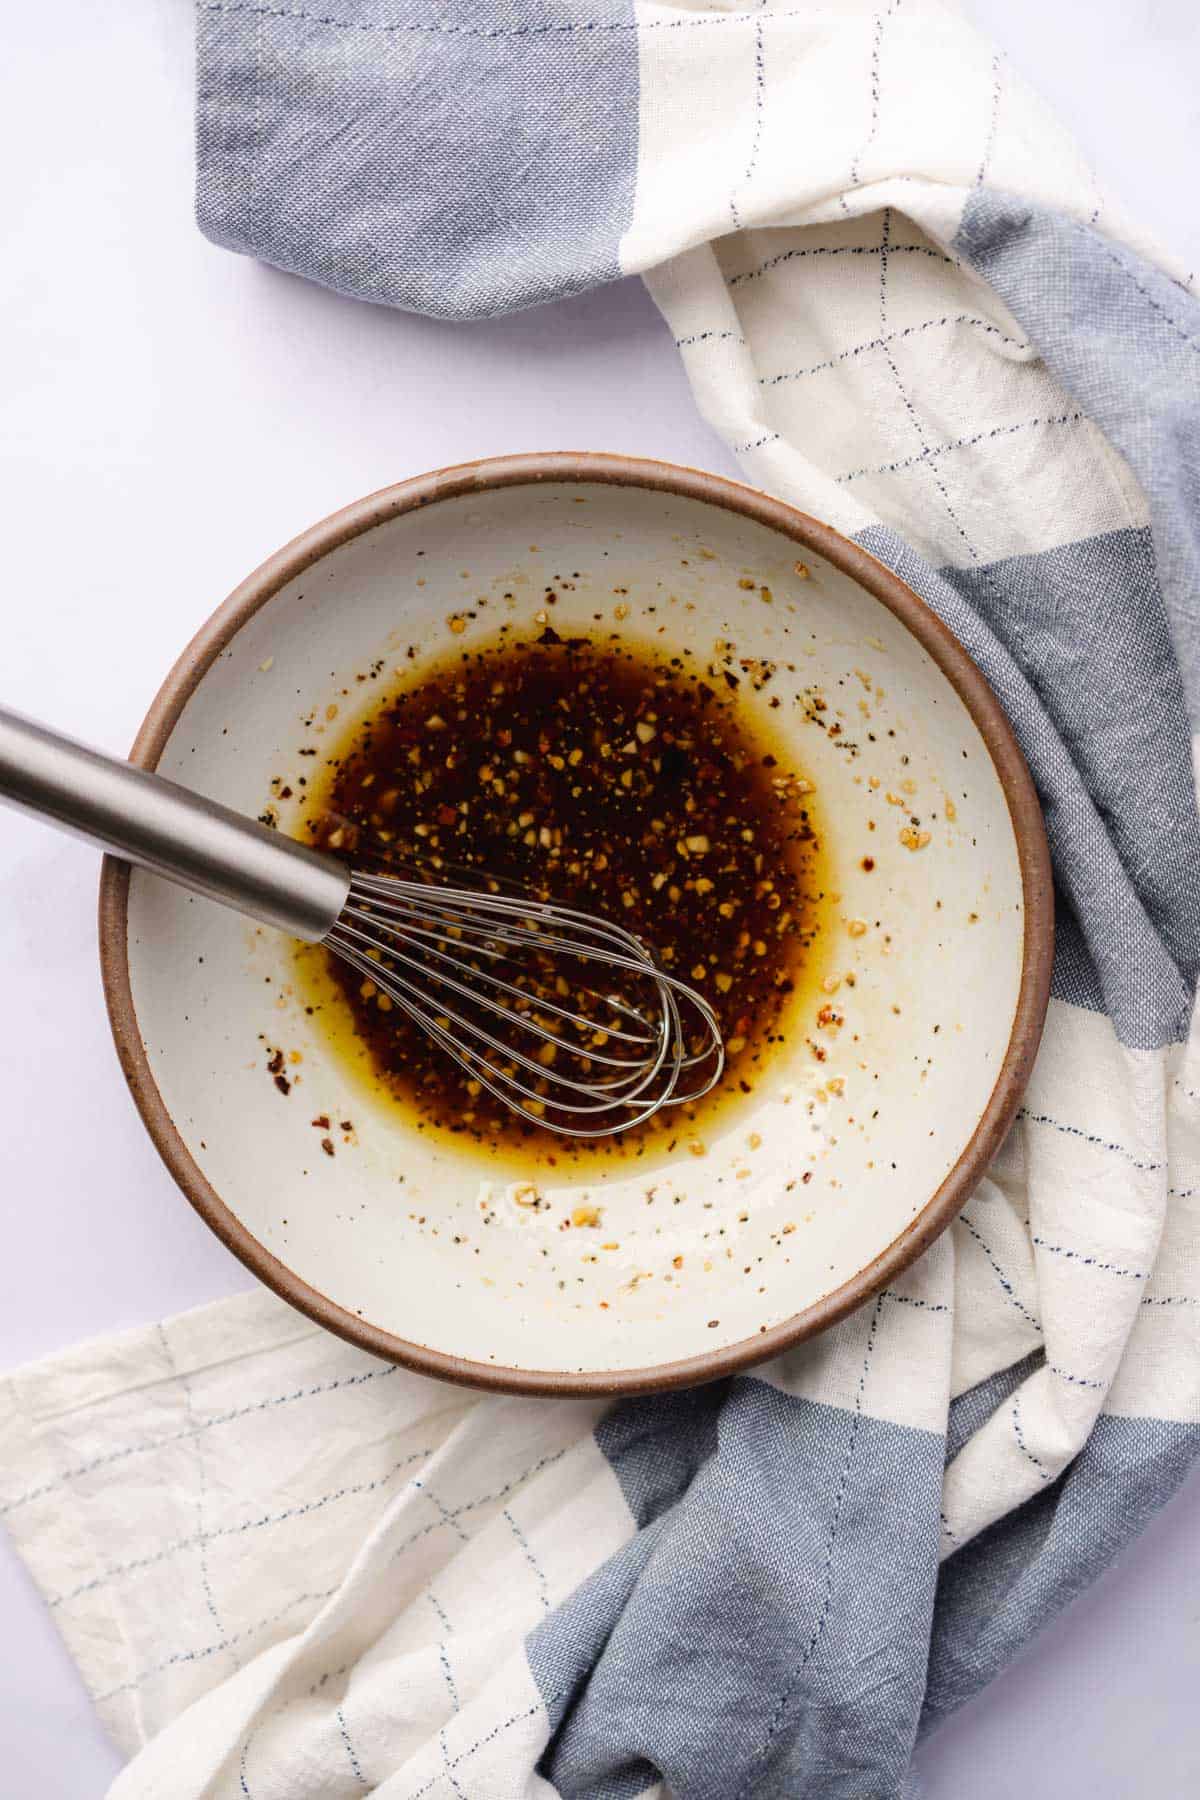 whisking together an olive oil and balsamic dressing for a salad